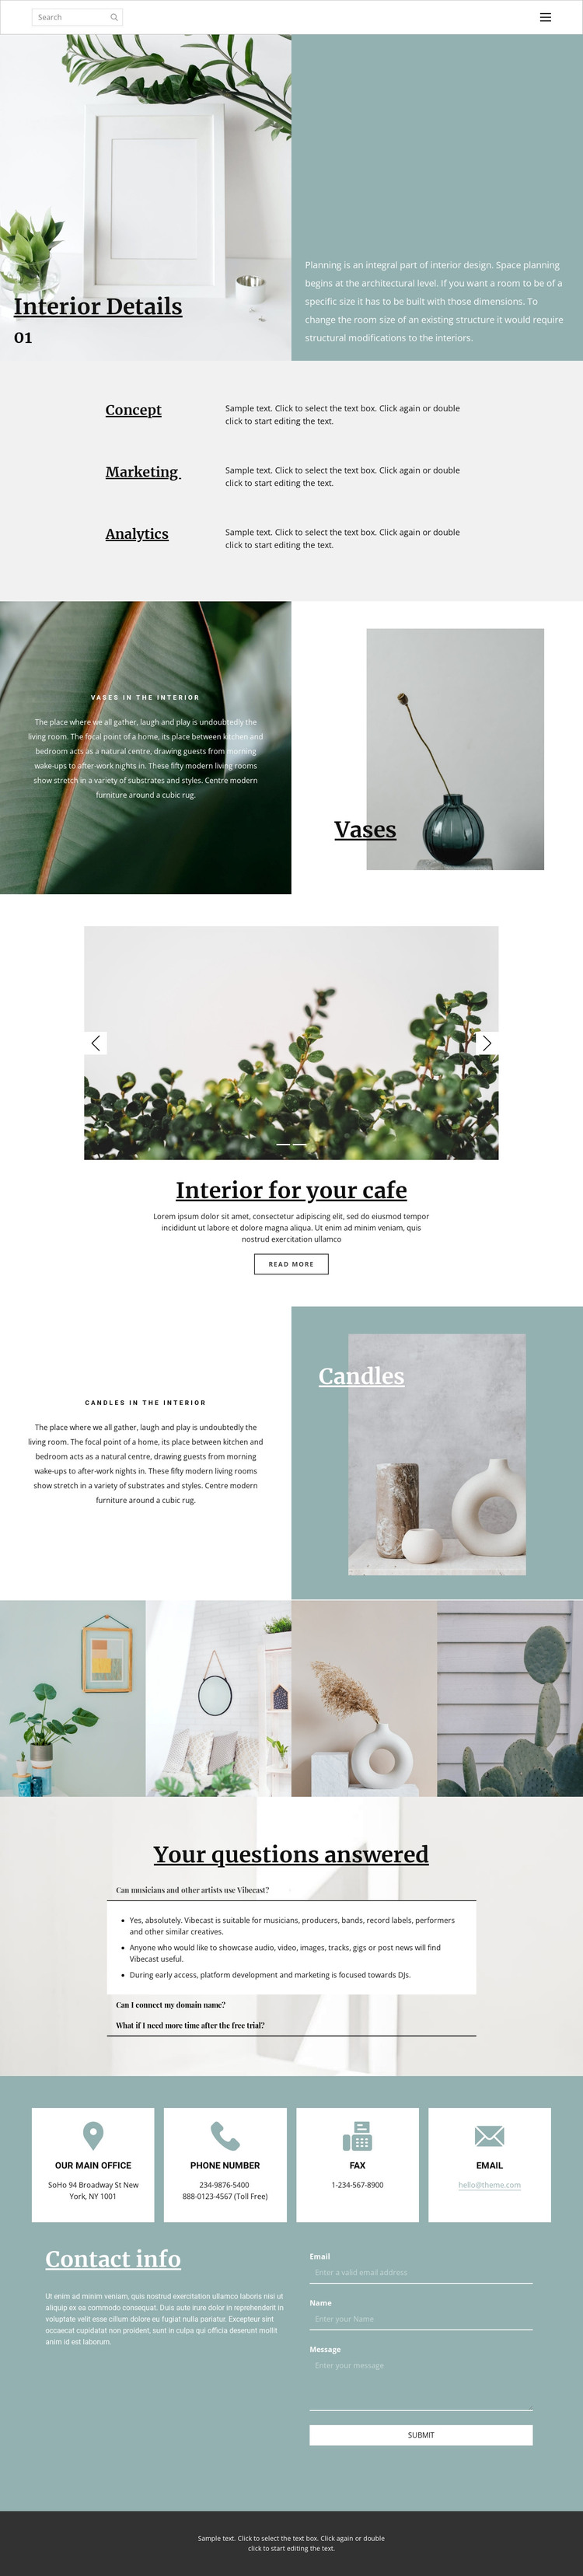 Help in organizing the space at home WordPress Theme